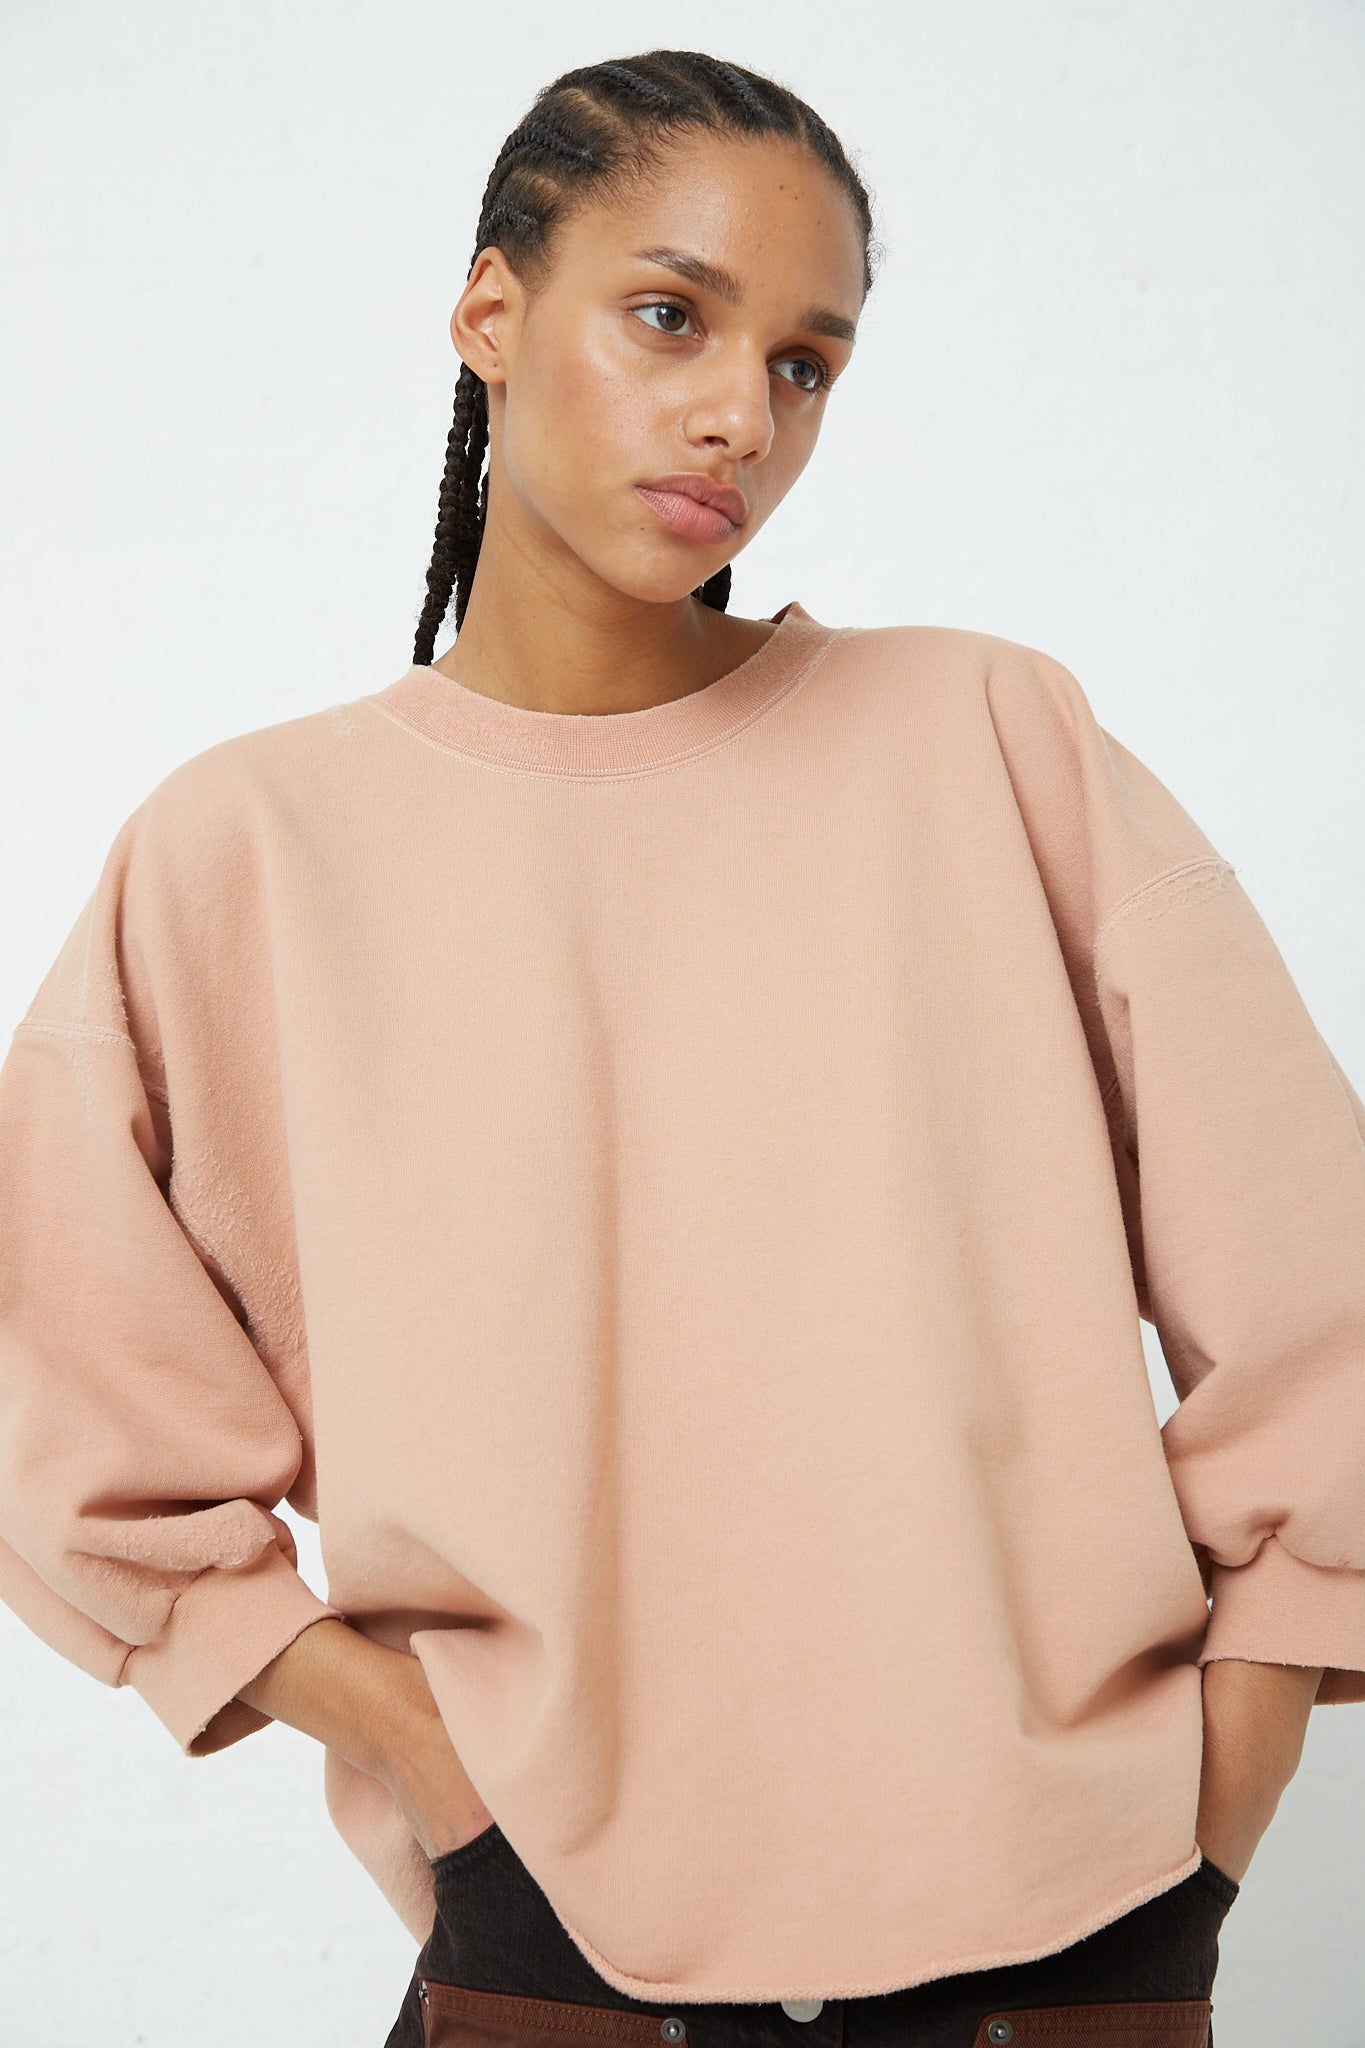 The model is wearing a Fond Sweatshirt in Fawn by Rachel Comey, which is a distressed cotton blend pink sweatshirt with a raw edge hemline.